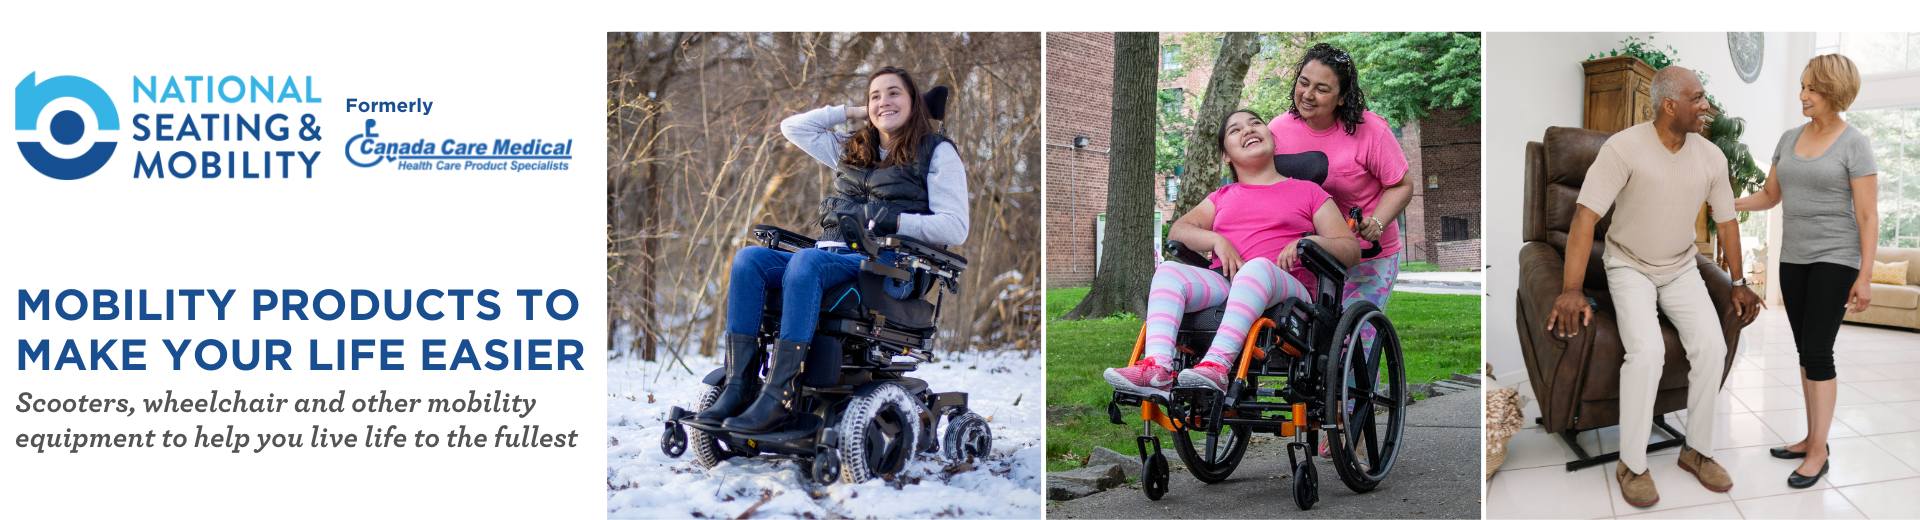 Images of people using a power chair, a manual tilt chair, and a lift chair.